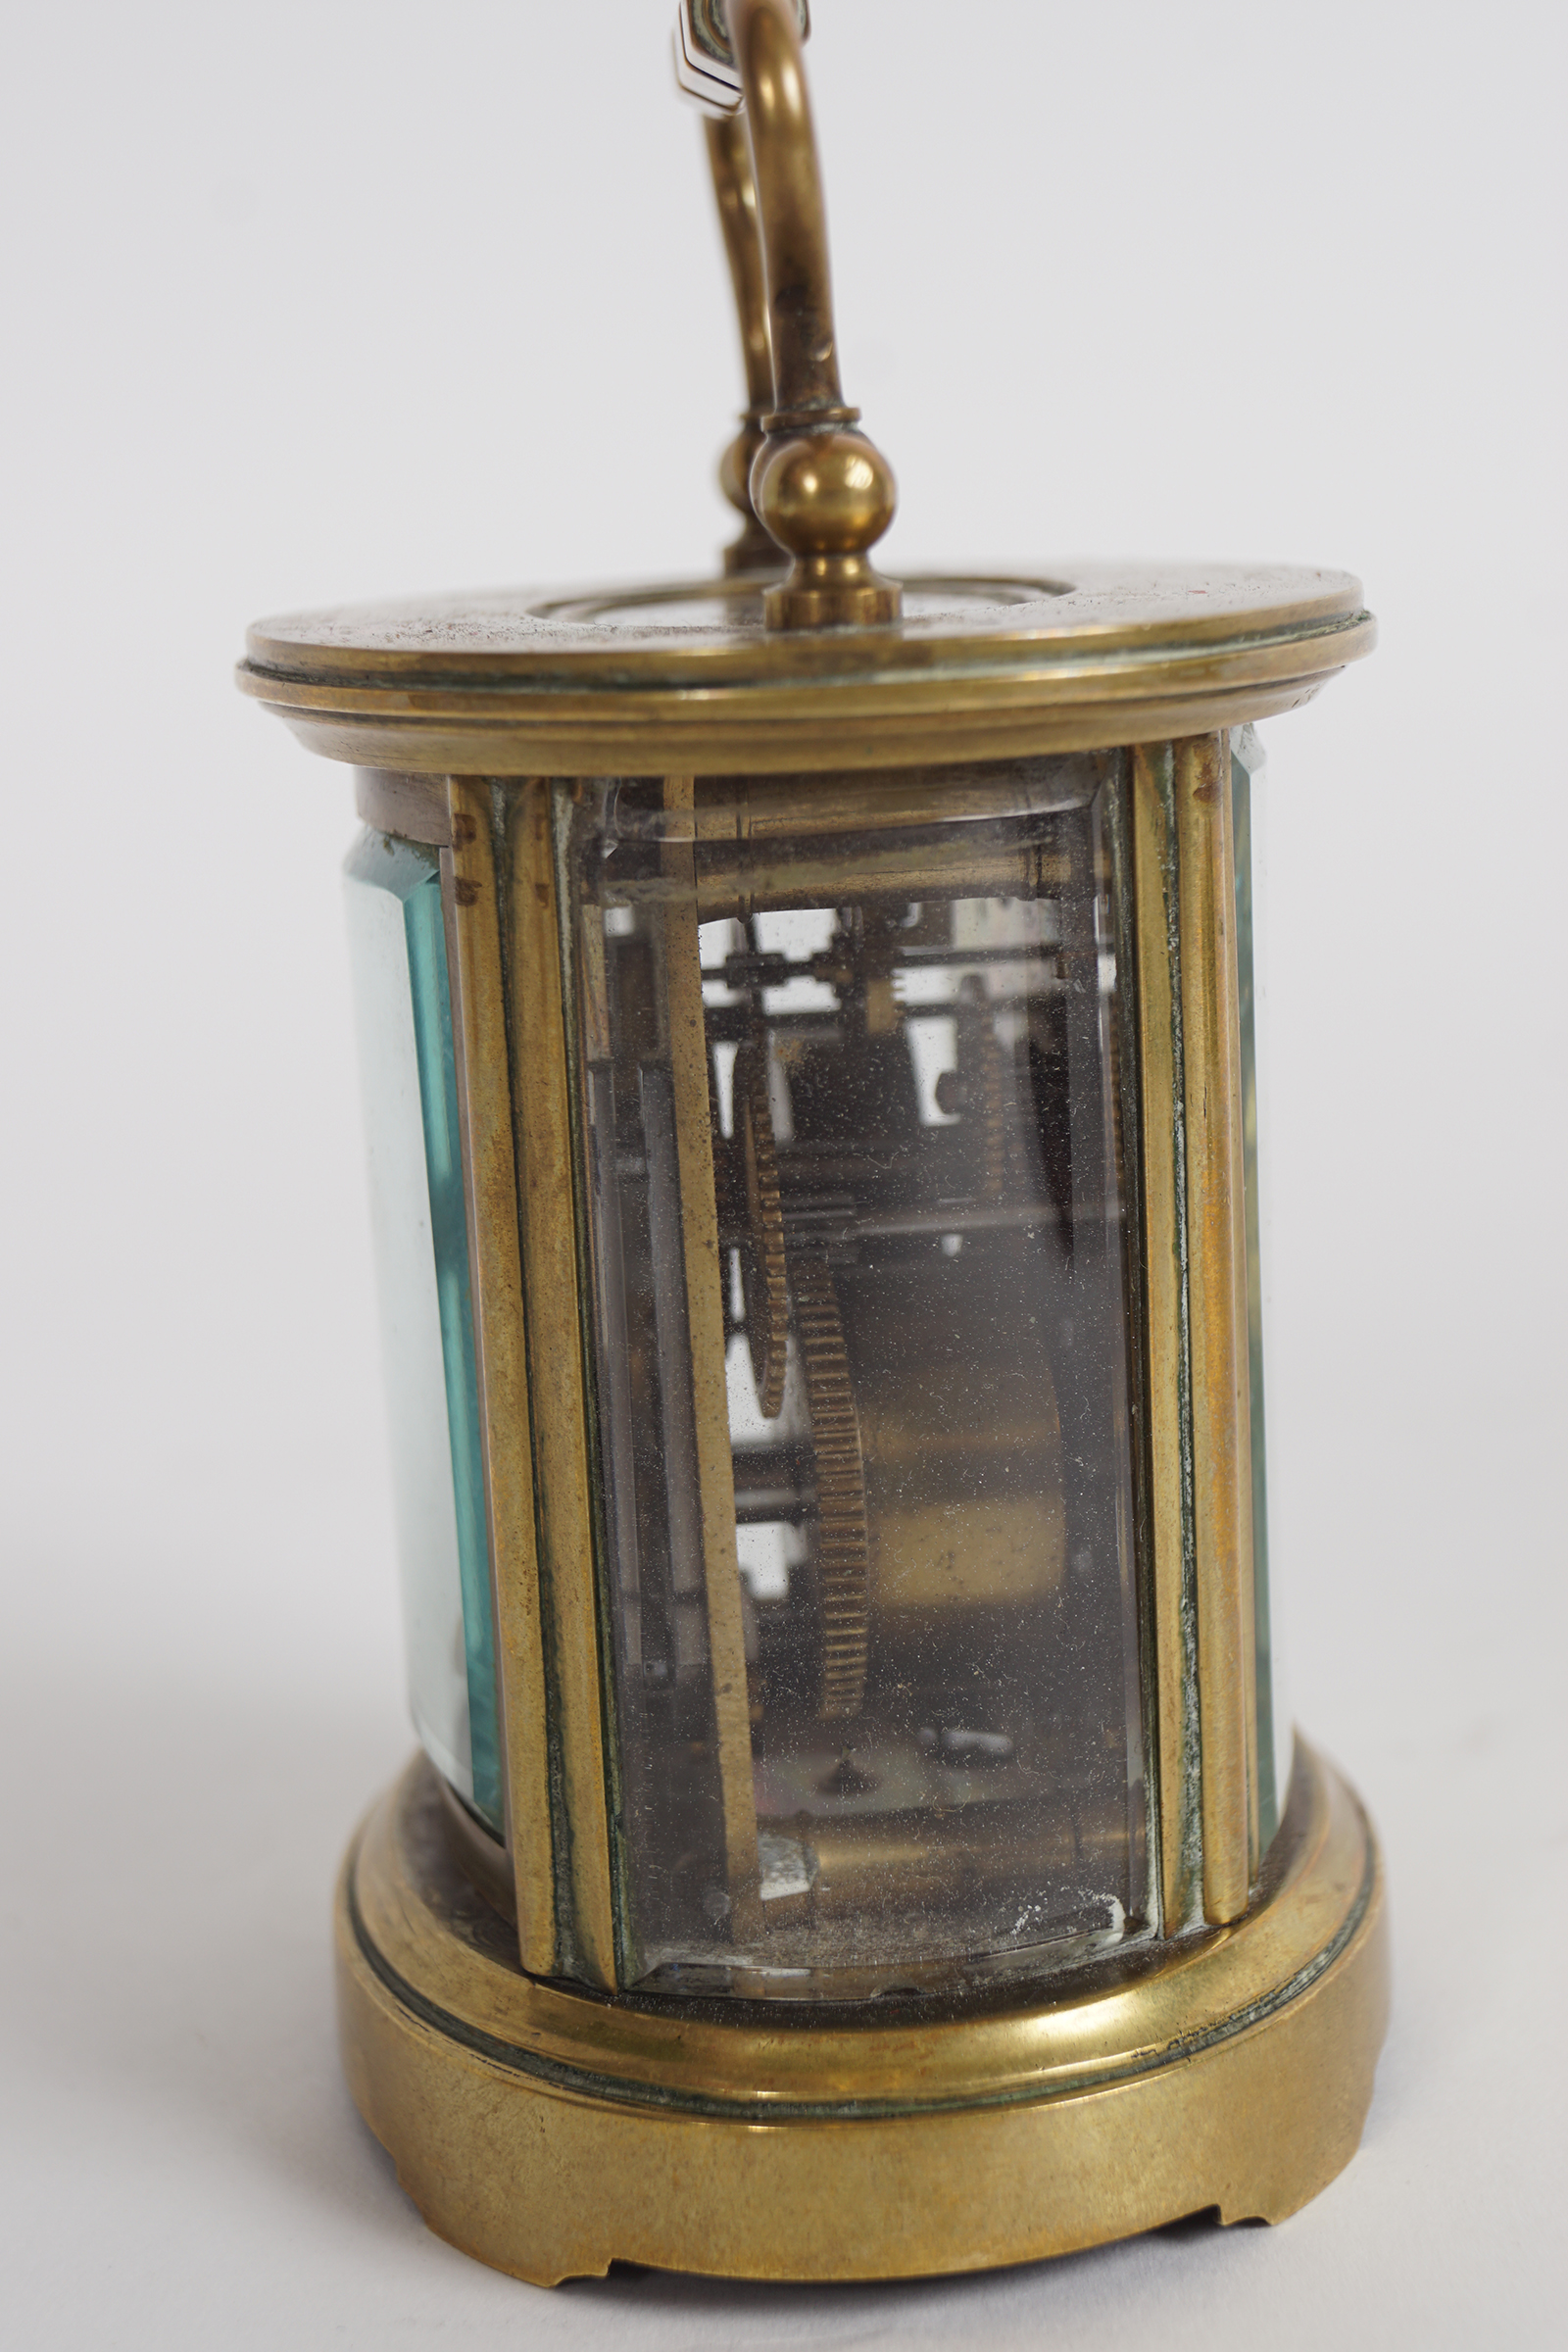 19TH-CENTURY BRASS CARRIAGE CLOCK - Image 3 of 4